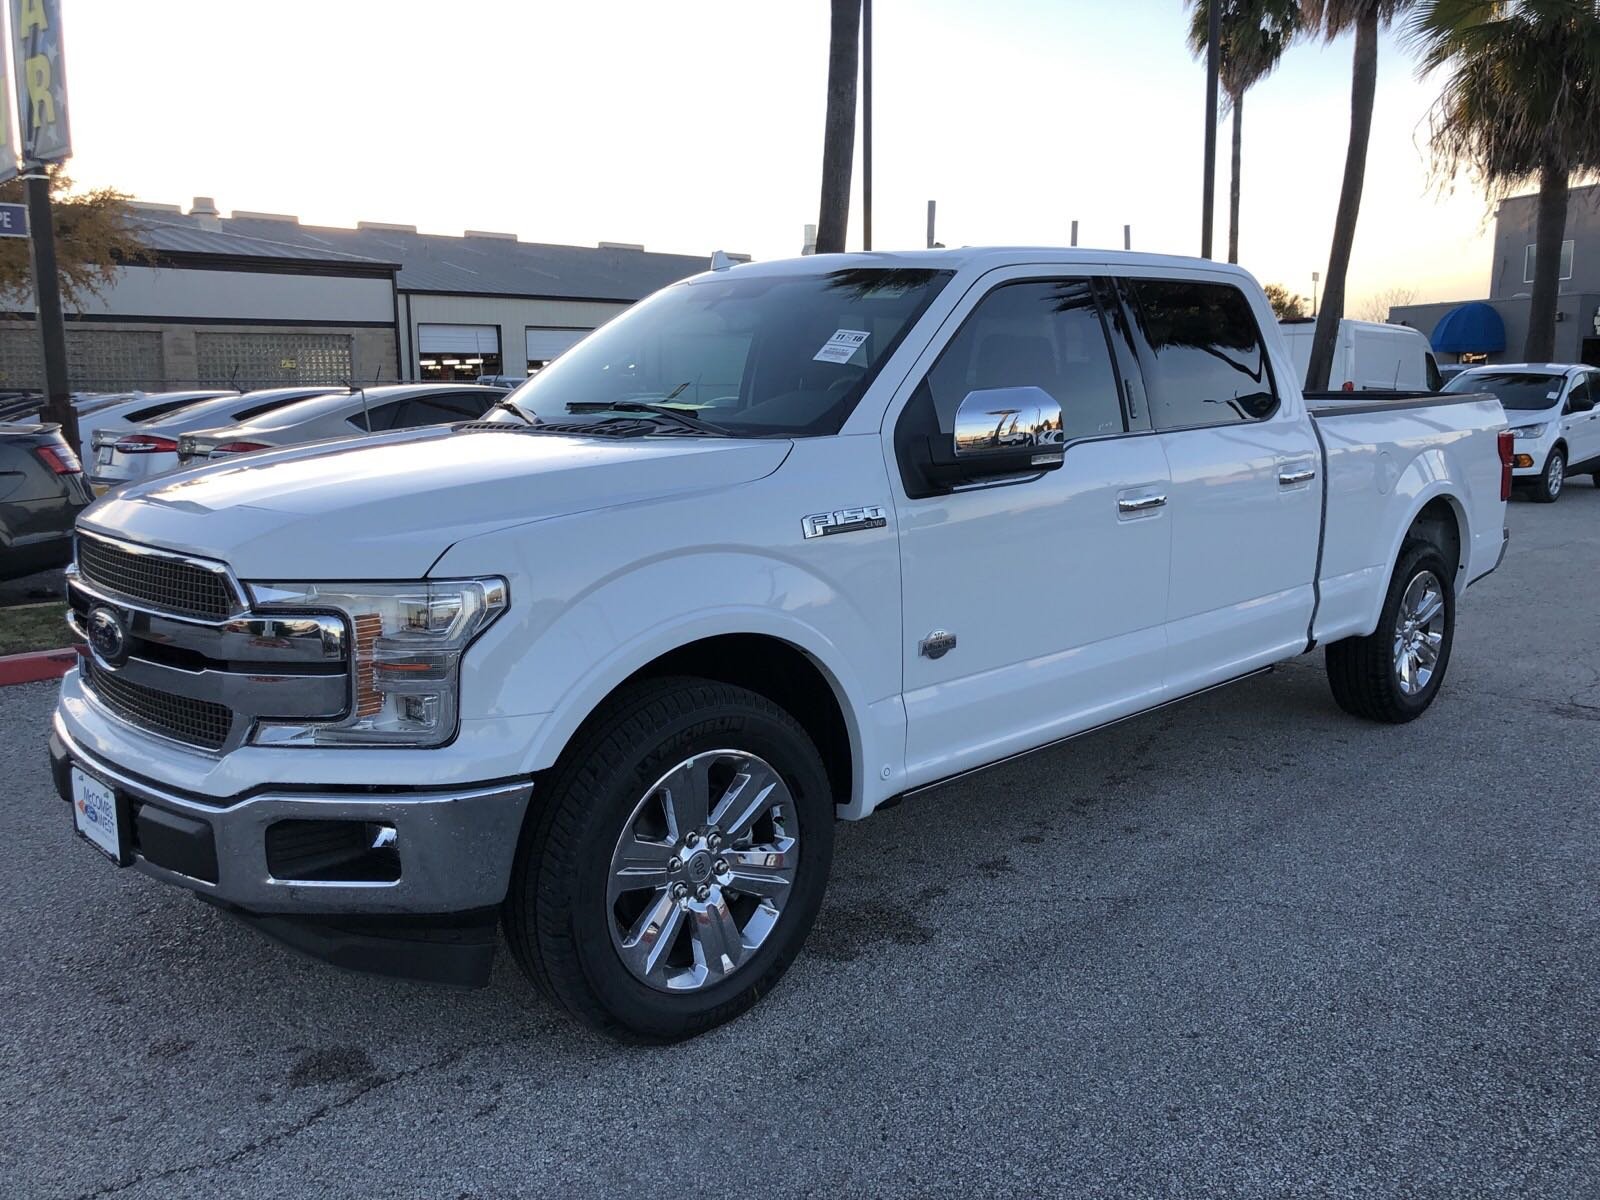 New 2019 Ford F-150 King Ranch Crew Cab Pickup in San Antonio #990187